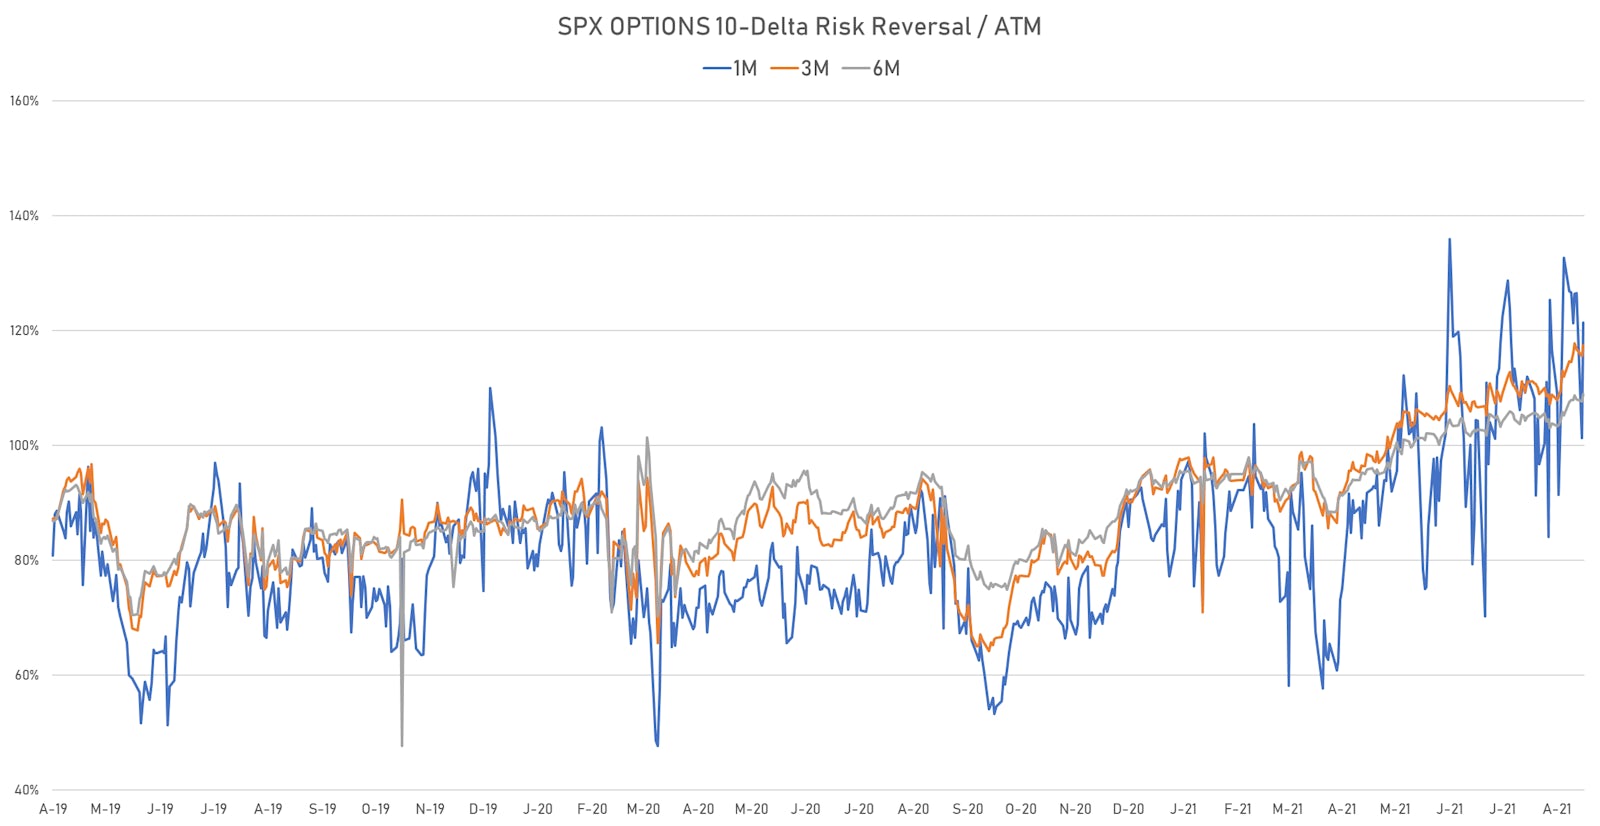 SPX Skew Indicates There Is Still A Lot Of Downside Hedging | Sources: ϕpost, Refinitiv data